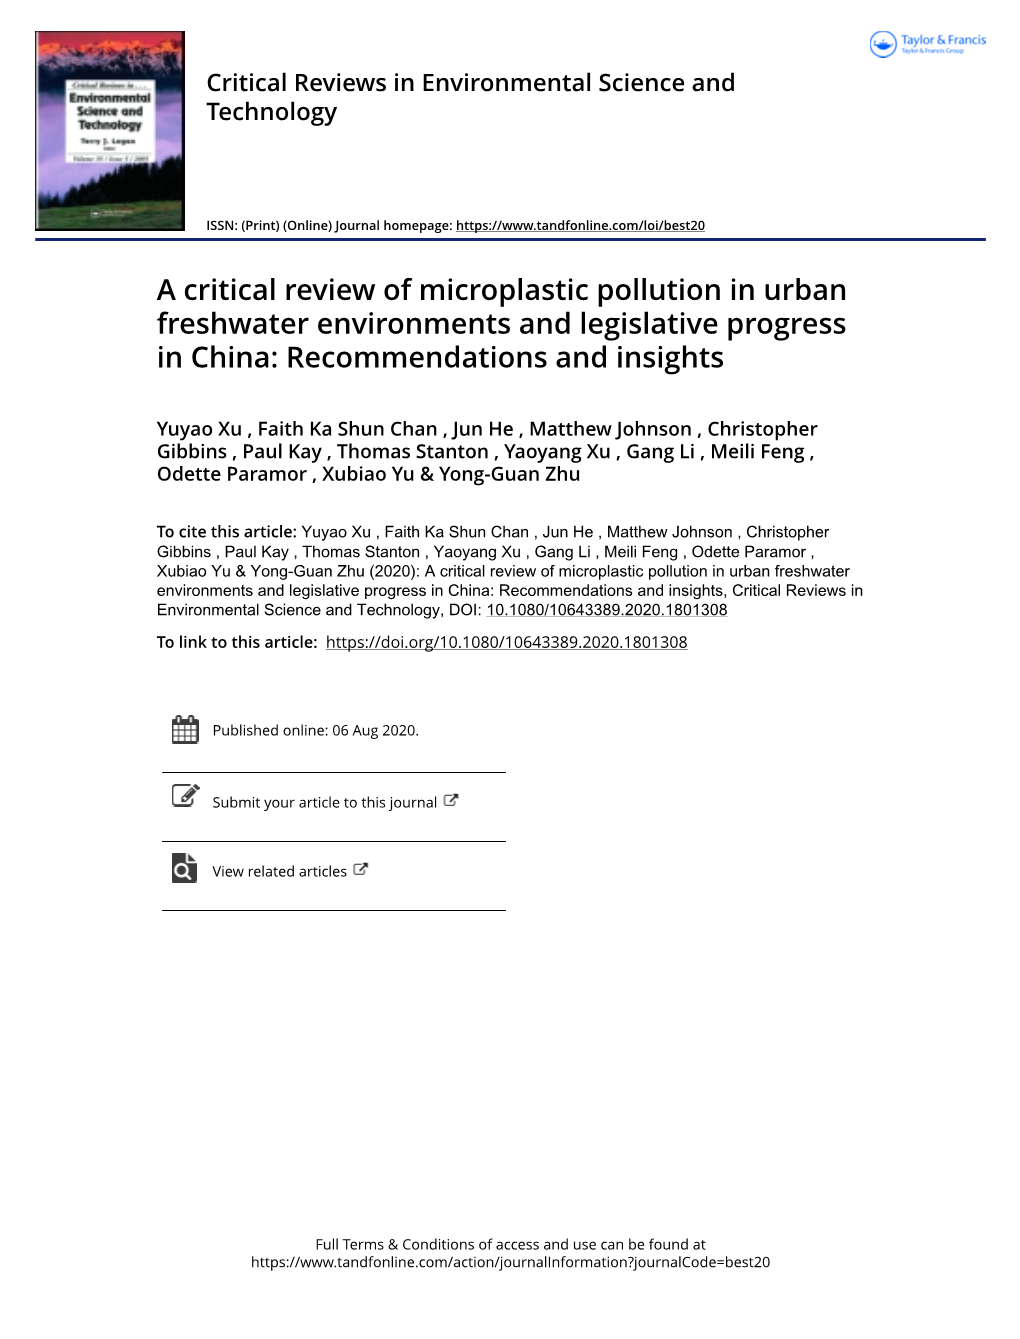 A Critical Review of Microplastic Pollution in Urban Freshwater Environments and Legislative Progress in China: Recommendations and Insights